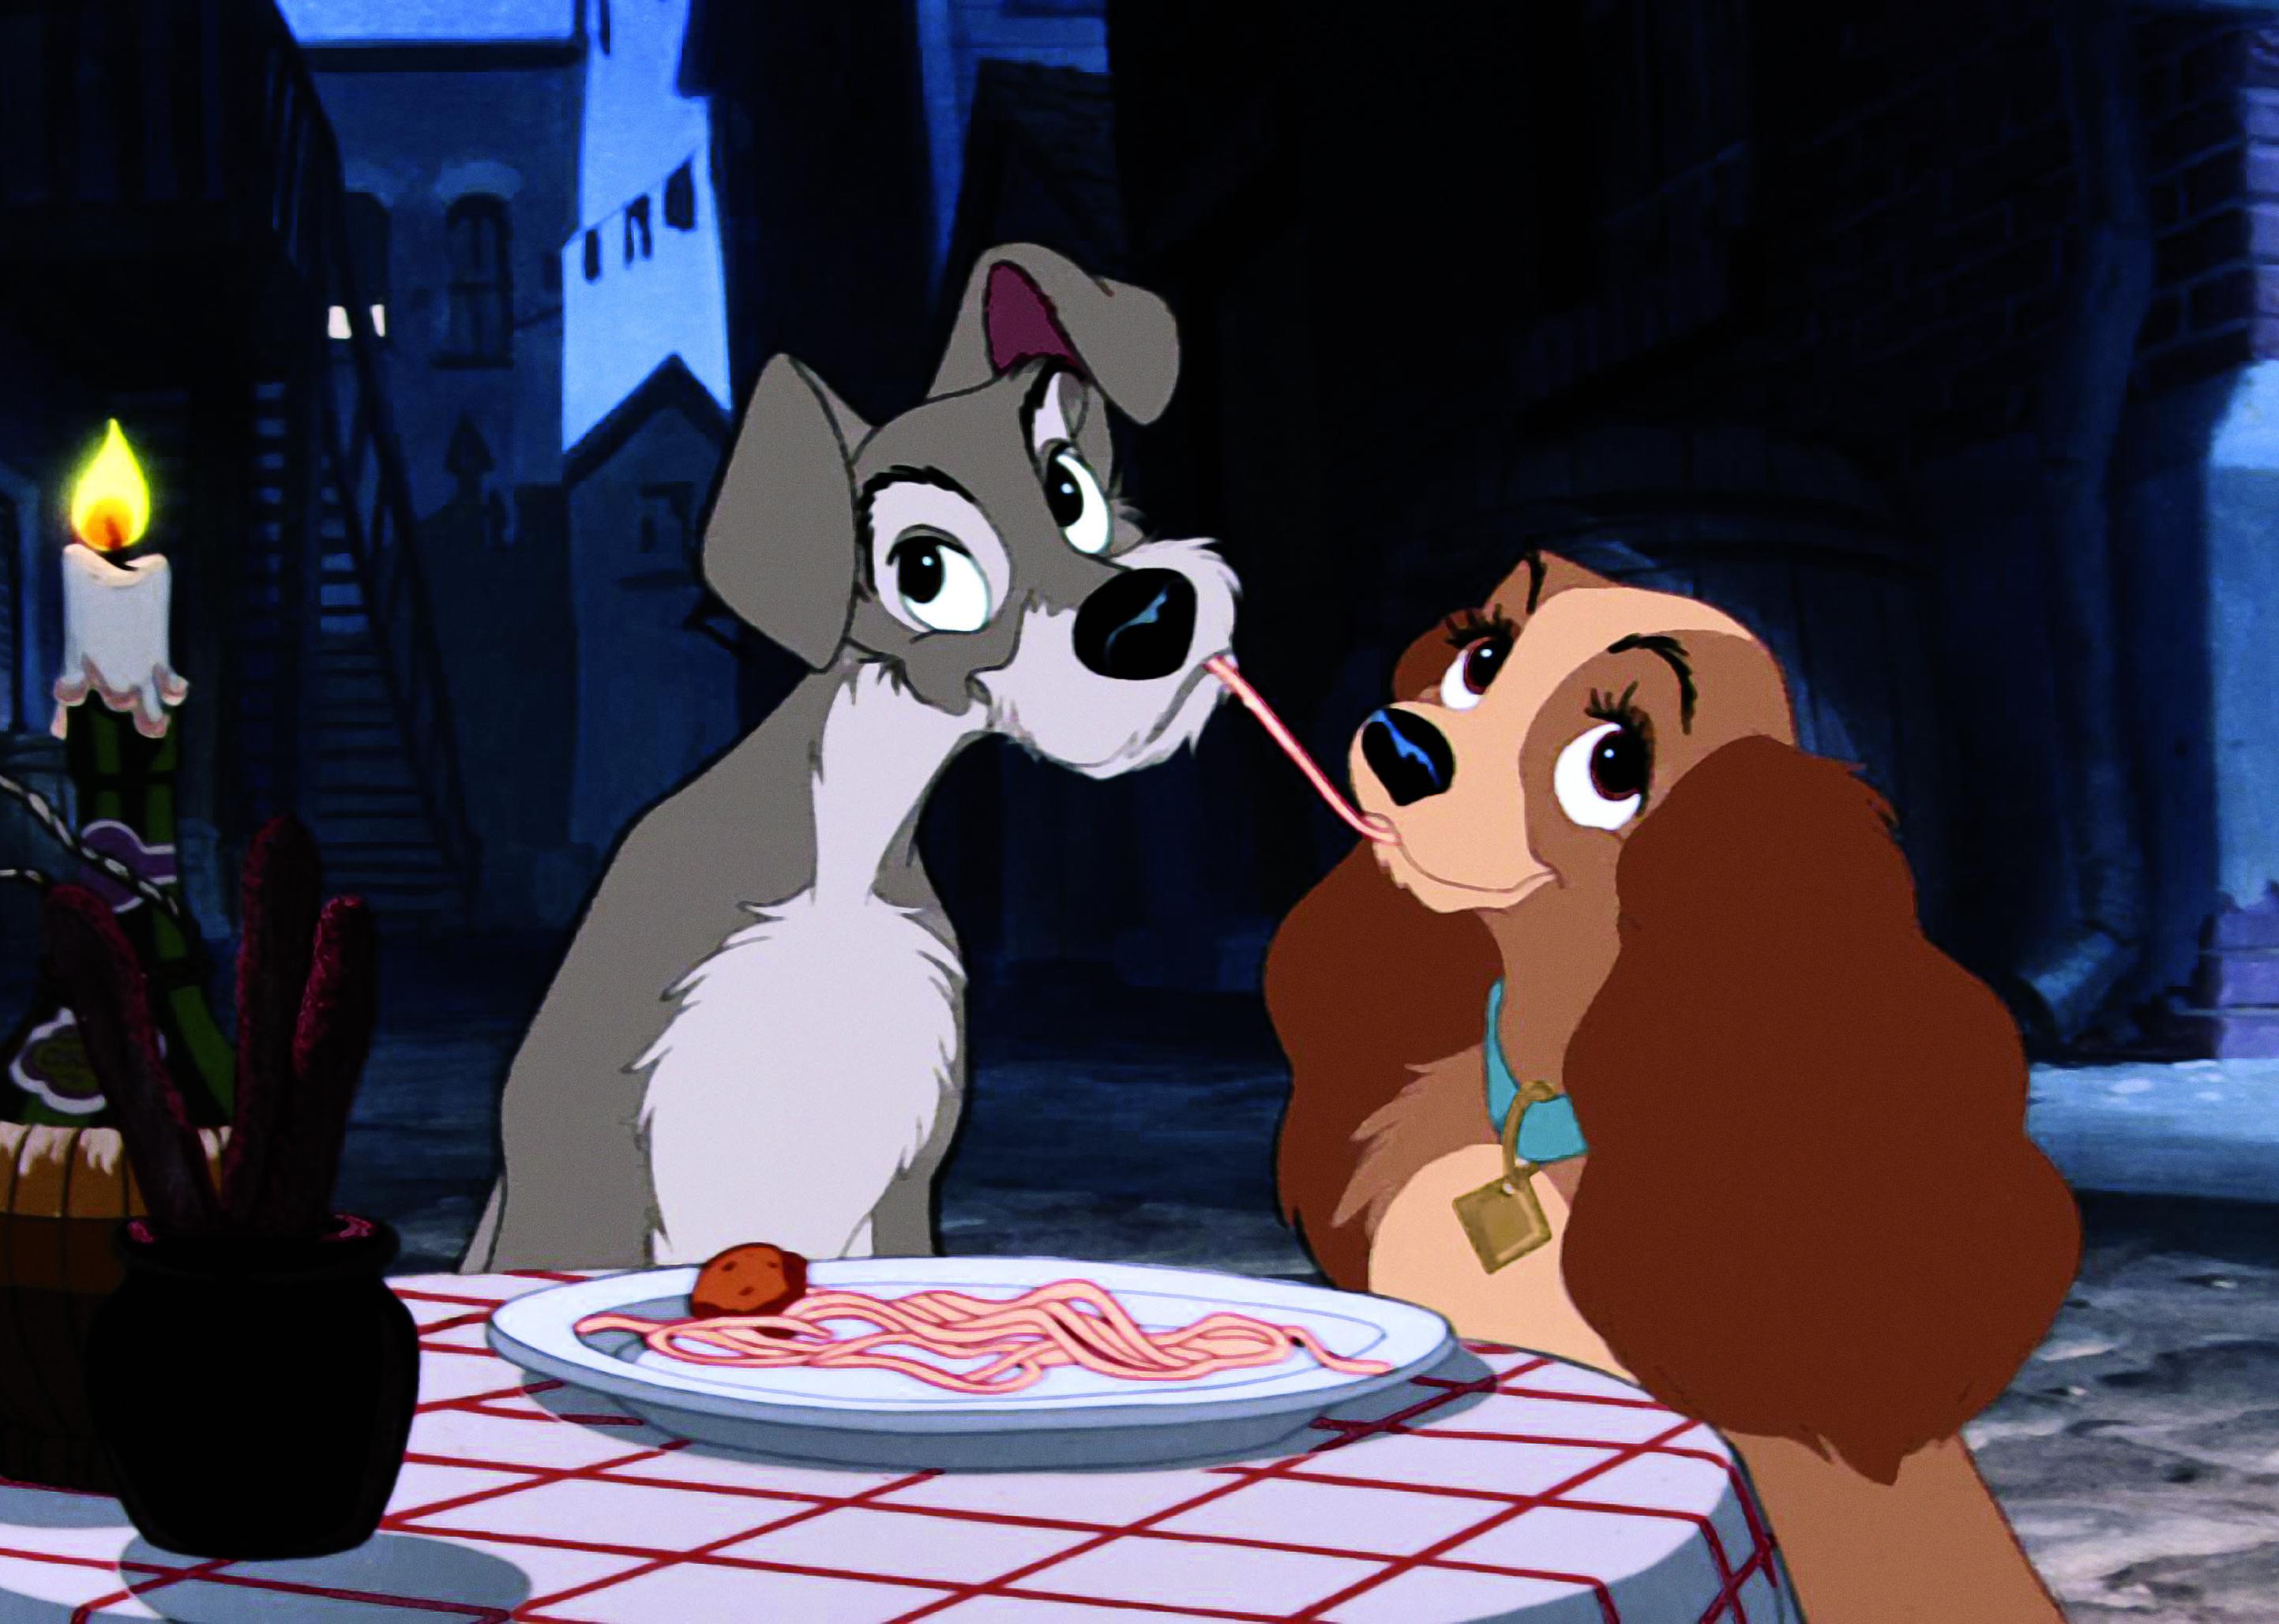 A cartoon of Lady and the Tramp sharing a plate of pasta at a candlelit dinner.